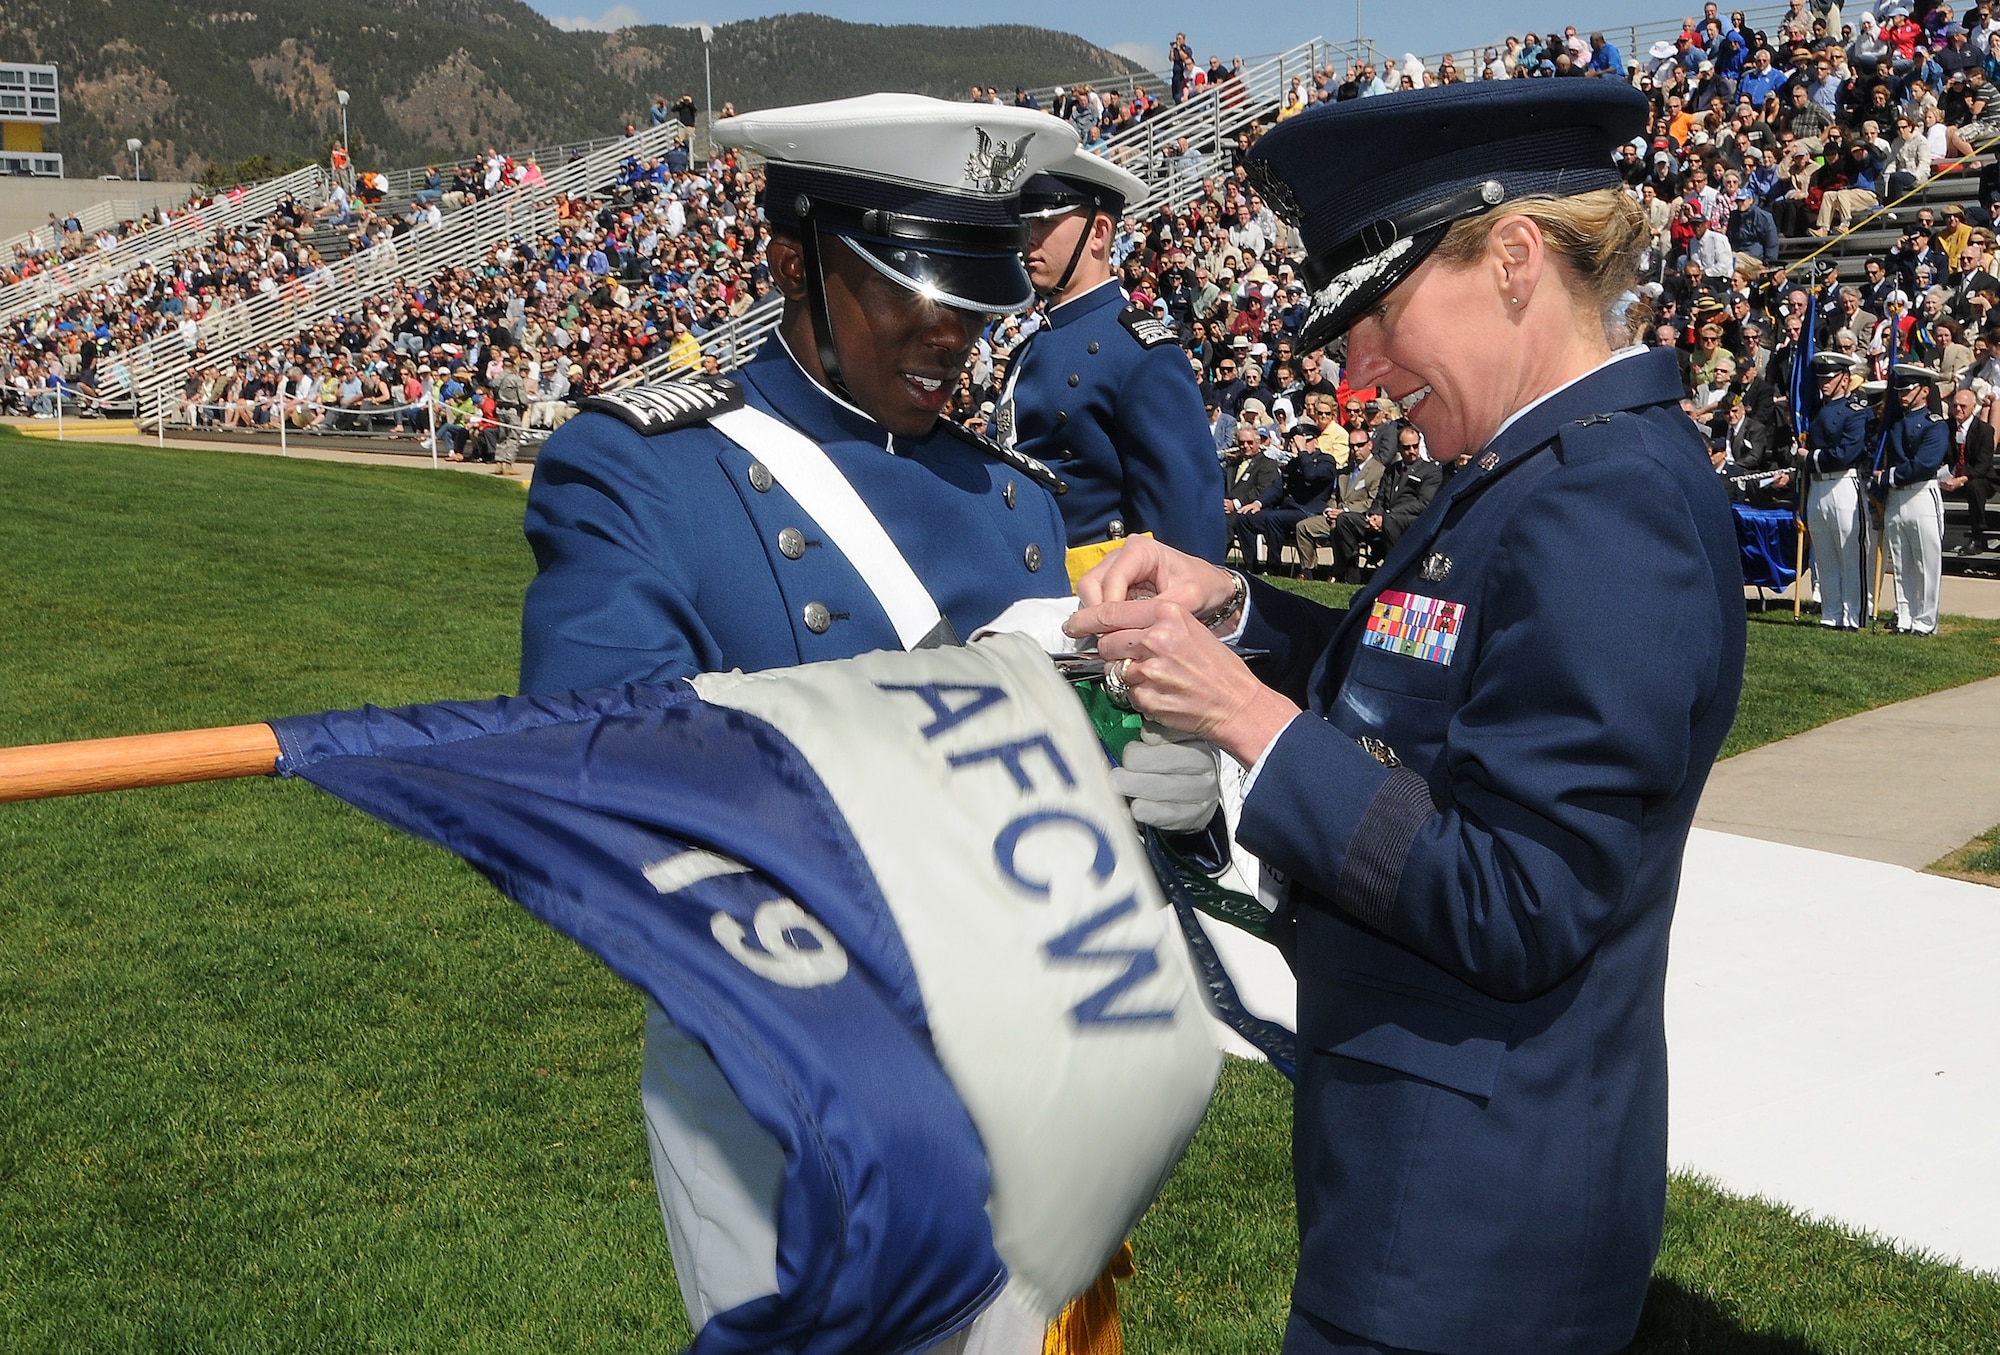 Cadet 1st Class Nathan Dial and Brig. Gen. Dana Born affix a 2010 Outstanding Squadron banner to Cadet Squadron 19's guidon during the Individual Awards Parade at the U.S. Air Force Academy's Stillman Parade Field May 24, 2010. Cadet Dial was the Fall 2009 Cadet Wing commander. General Born is the dean of the faculty. (U.S. Air Force photo/Rachel Boettcher)